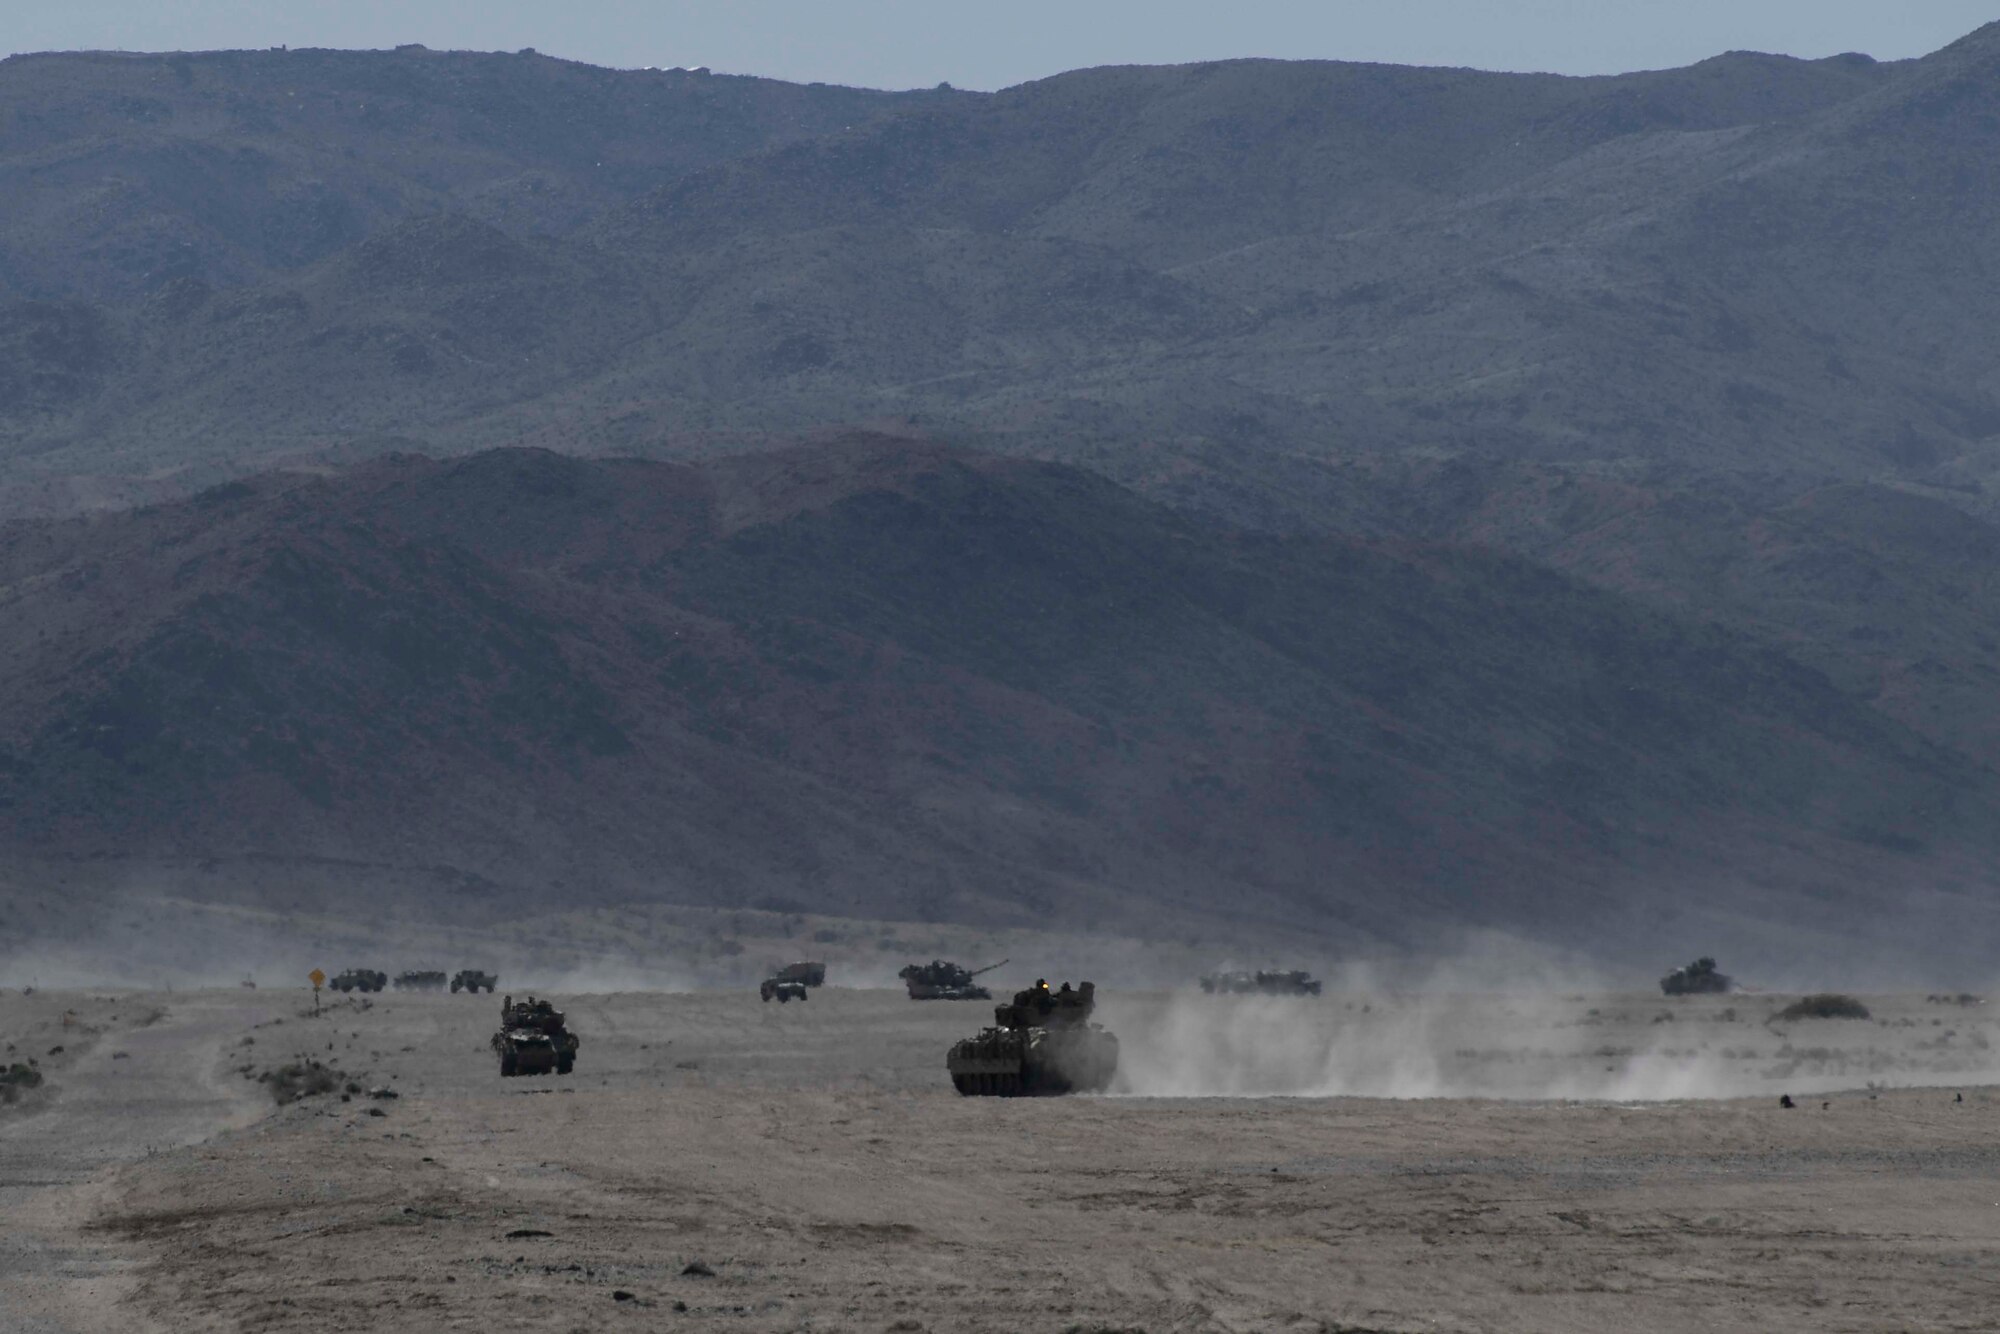 Conventional forces with the 1st Brigade Combat Team, 10th Mountain Division from Fort Drum, New York, and the 520th Infantry Battalion from Joint Base Lewis-McChord, Washington, conduct battlefield training against an opposing force during a scenario as part of National Training Center 18-10 at Fort Irwin, California, Sept. 2, 2018.